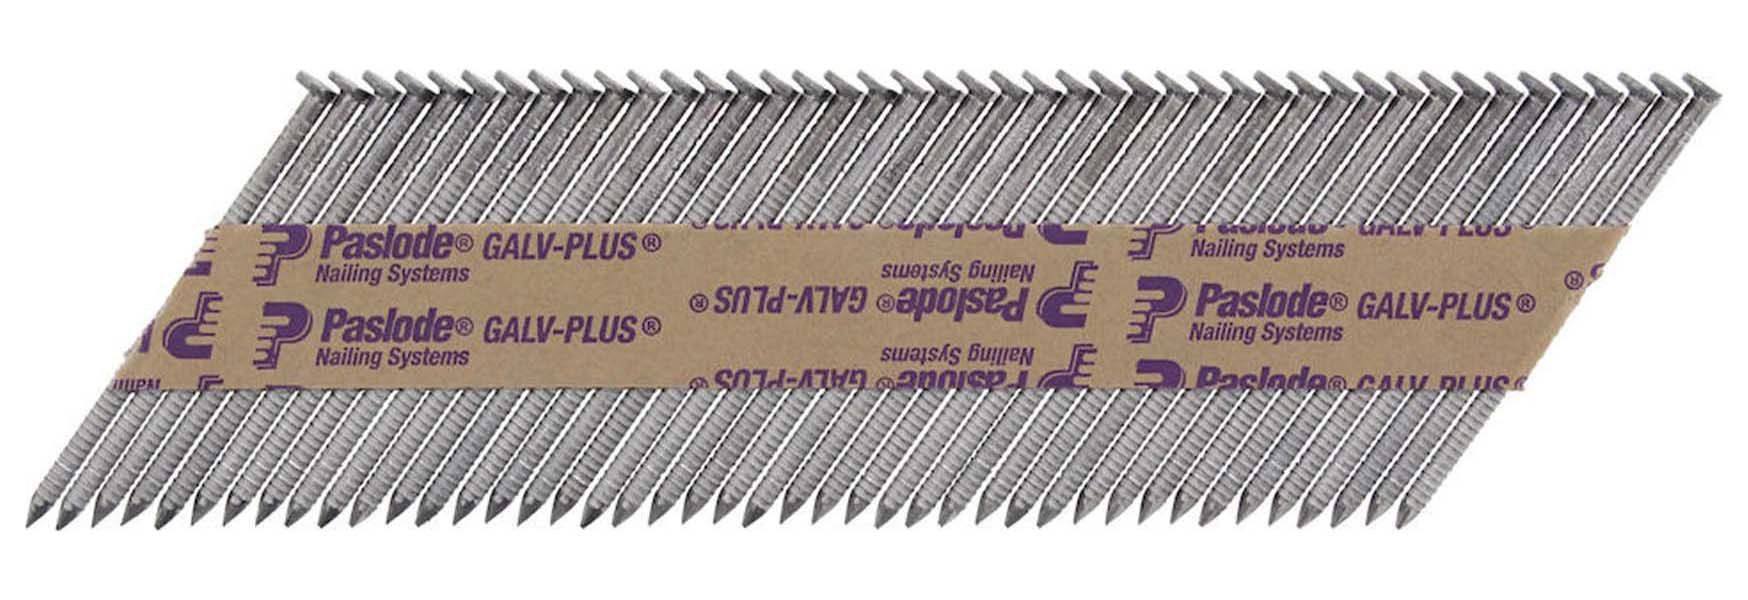 Image of Paslode IM350 2.8mm x 63mm Galv-Plus Collated Box of 1100 Nails + 1 Fuel Cell